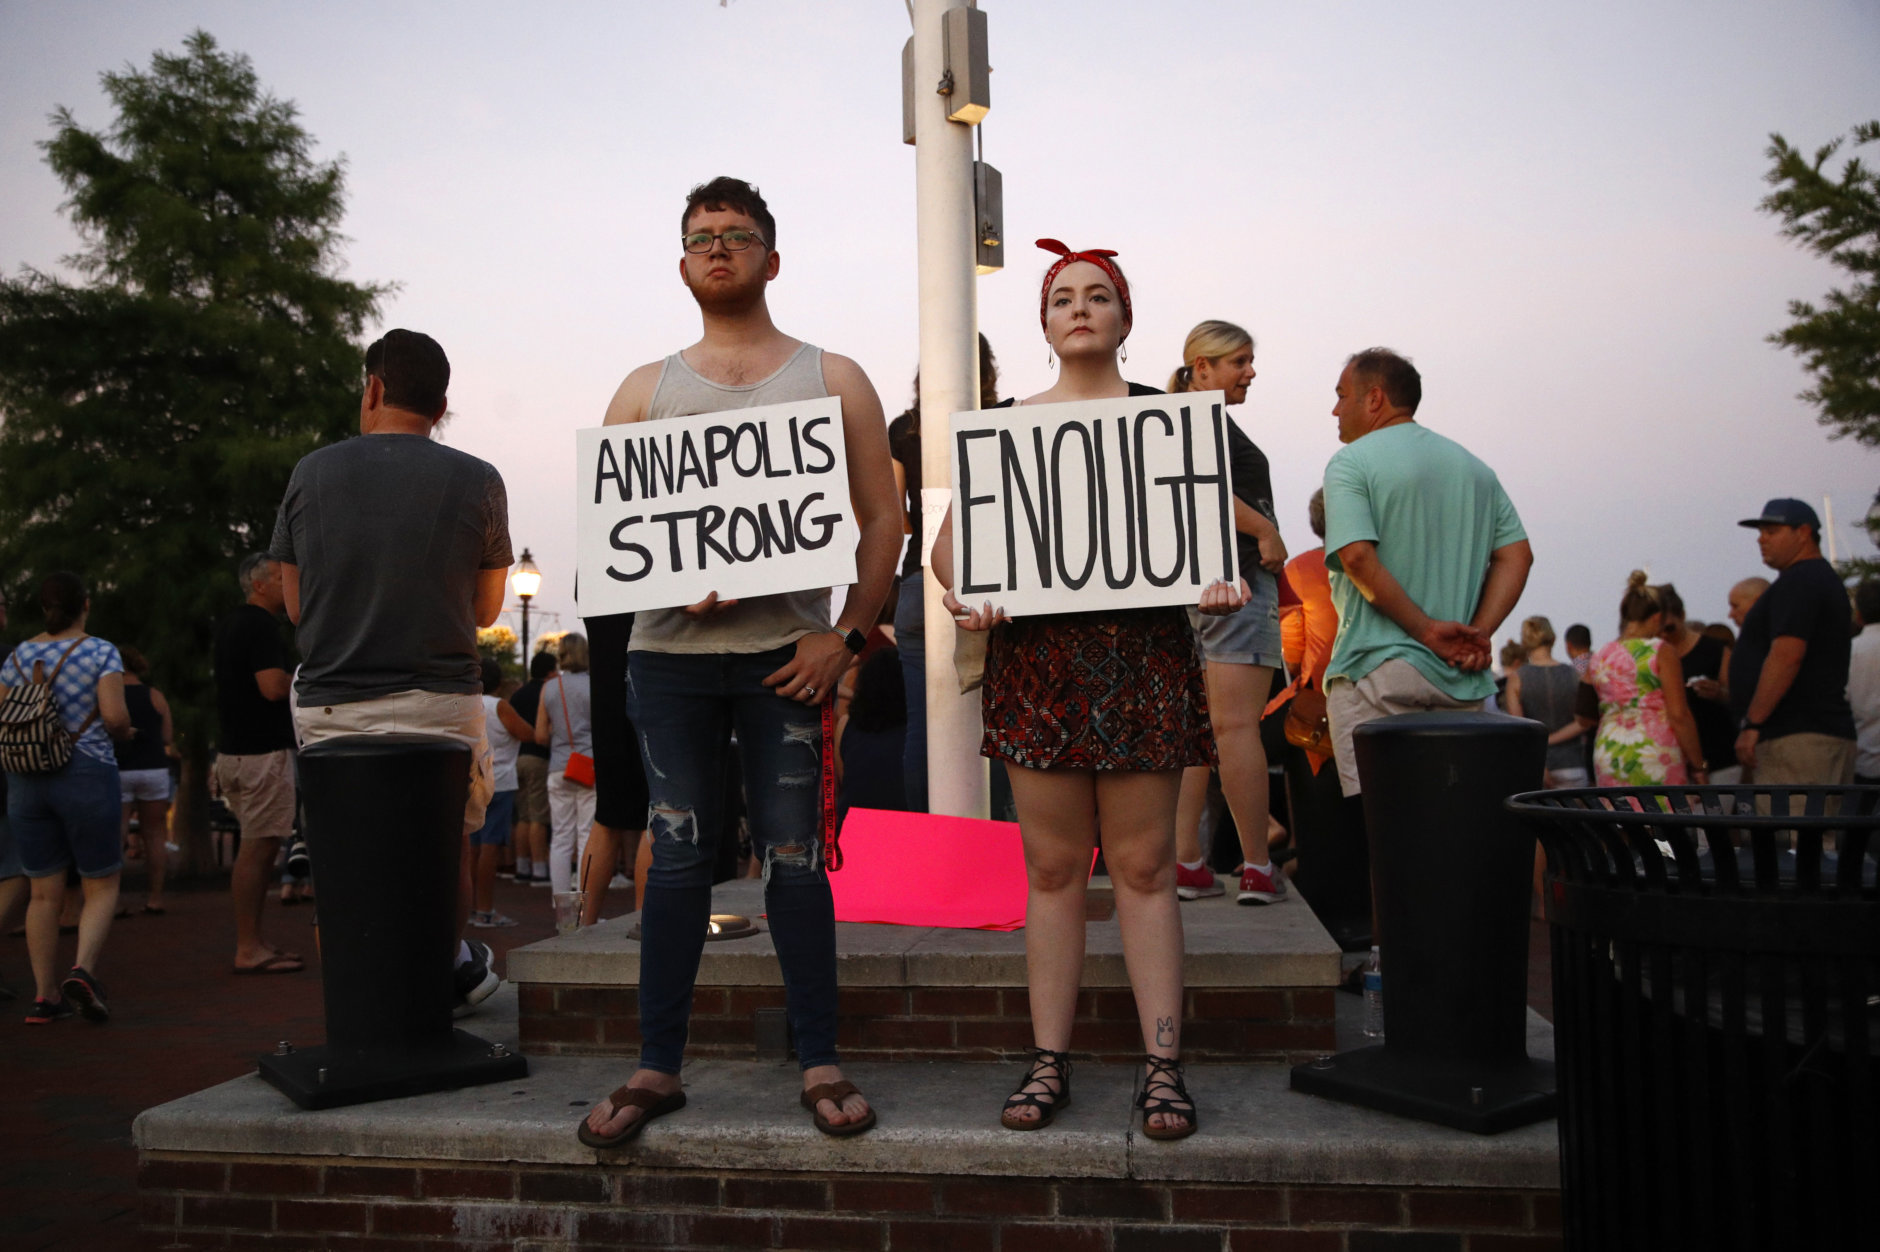 Tanner Piekarski, left, and Kylie Myles hold signs during a vigil in response to a shooting at The Capital Gazette newspaper office, Friday, June 29, 2018, in Annapolis, Md. Prosecutors say Jarrod W. Ramos opened fire Thursday in the Capital Gazette newsroom. (AP Photo/Patrick Semansky)